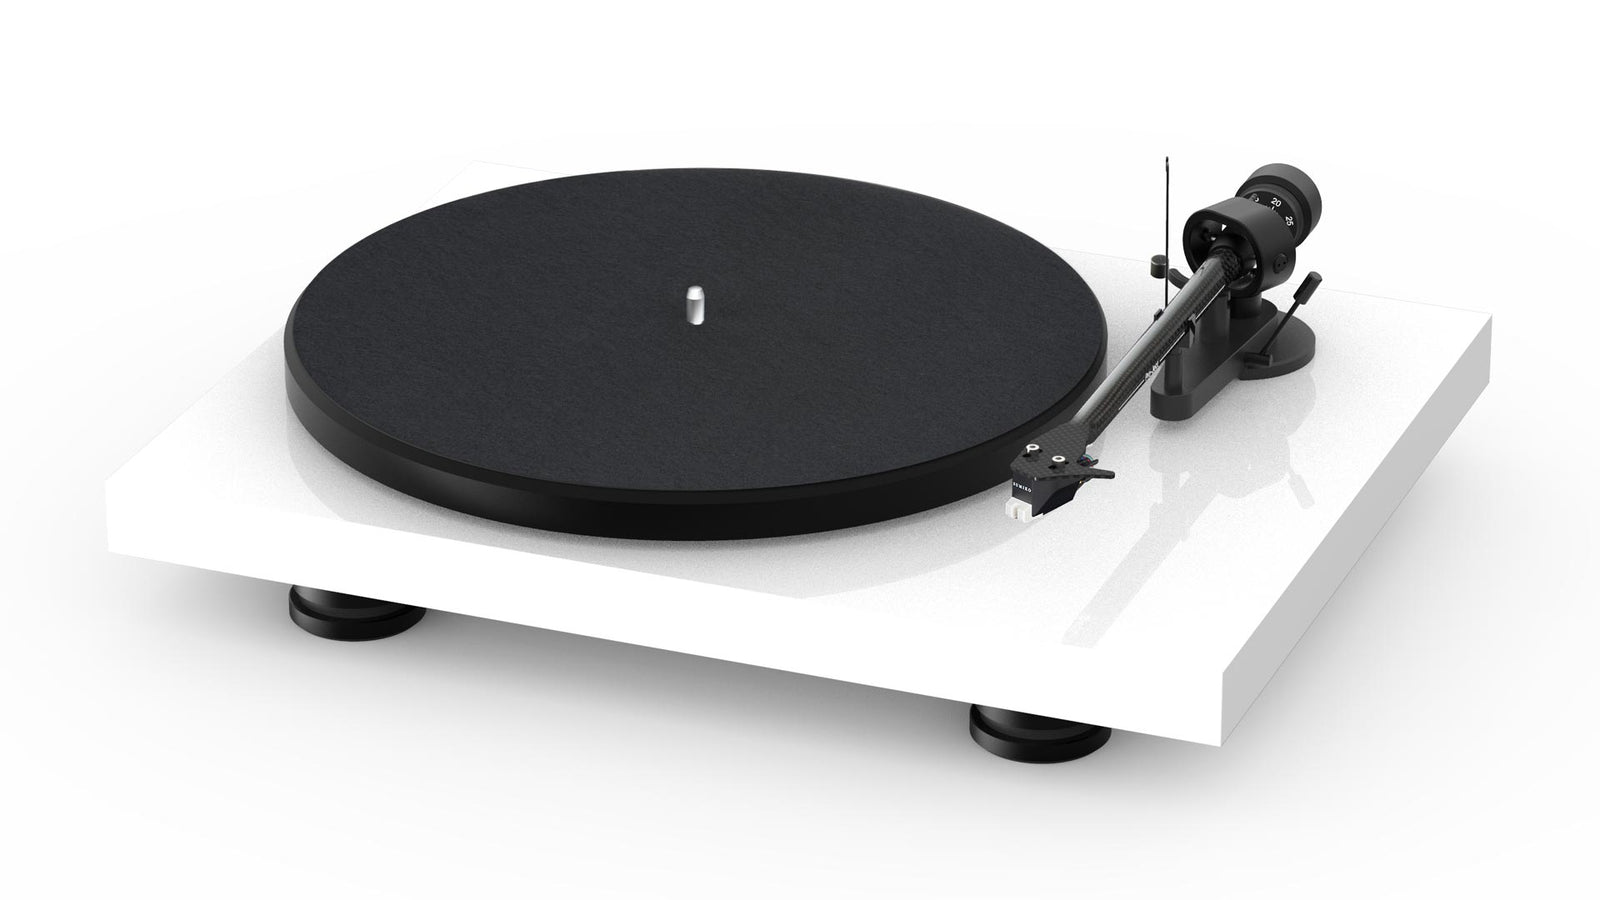 Pro-ject Audio at Vinyl Sound. Available at the best price: Pro-ject Turntables X1 - X8 - X2 – Pro-ject 6 PerspeX SB - RPM 1 Carbon - RPM 10 Carbon – Xtension 12 Evolution... Pro-ject HiFi Electronics Phono Preamplifier · Vinyl Recording · Pro-ject Preamplifier – Pro-ject Phono Box...